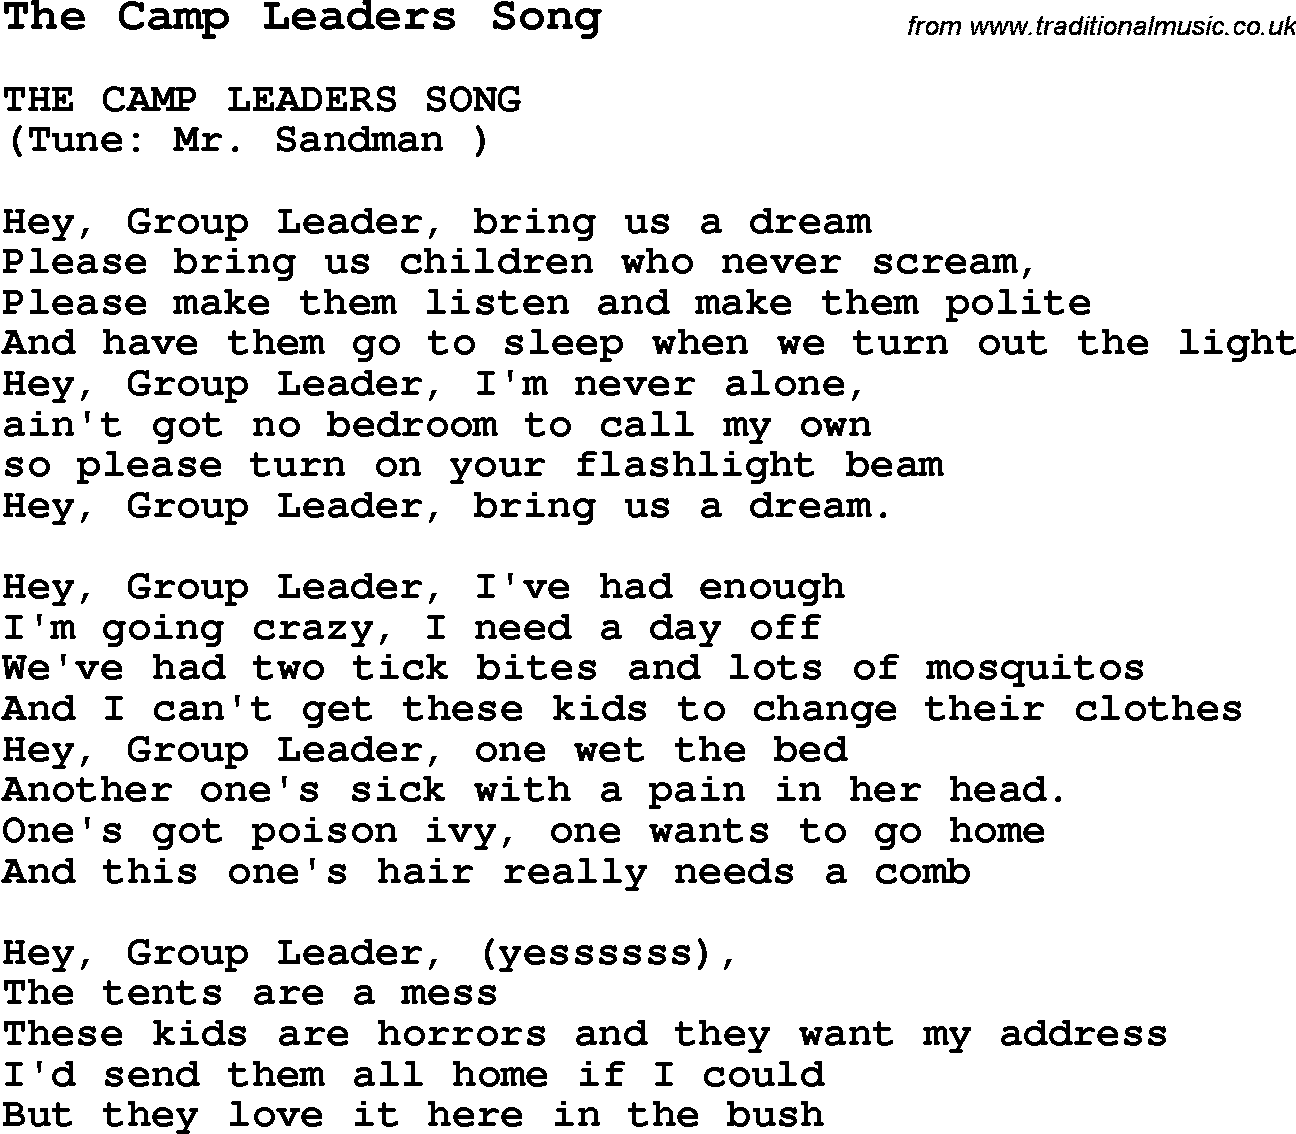 Summer-Camp Song, The Camp Leaders Song, with lyrics and chords for Ukulele, Guitar Banjo etc.